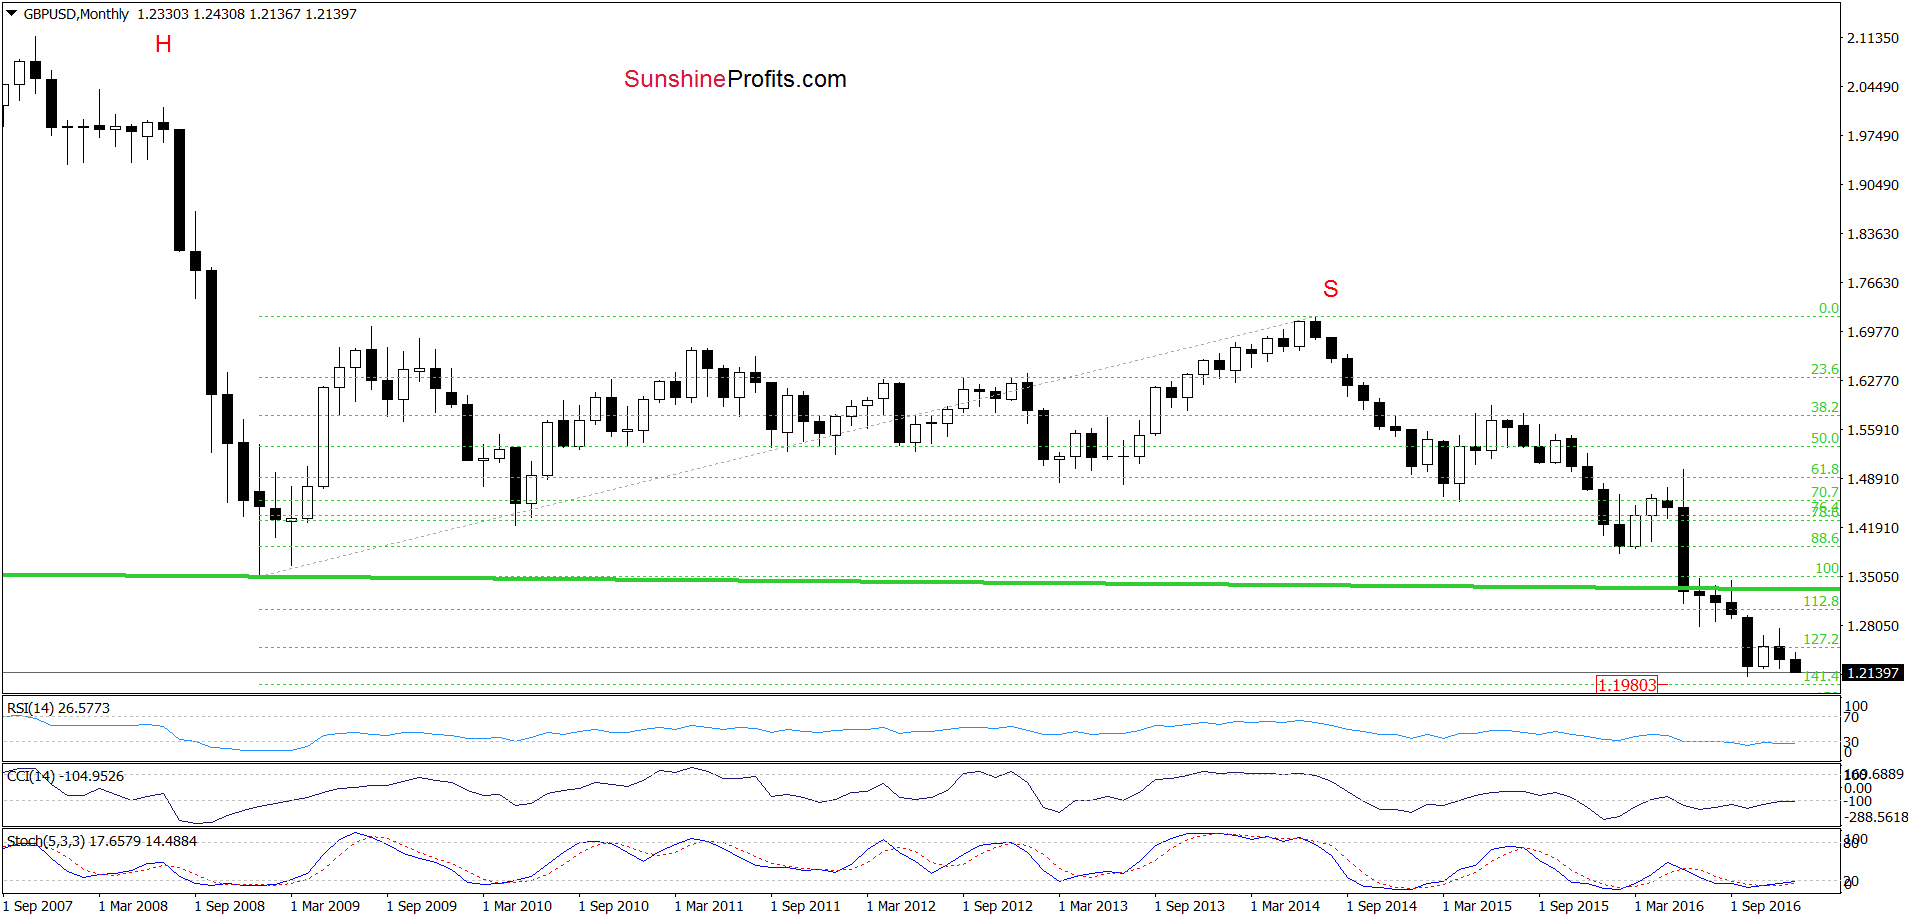 GBP/USD - the monthly chart